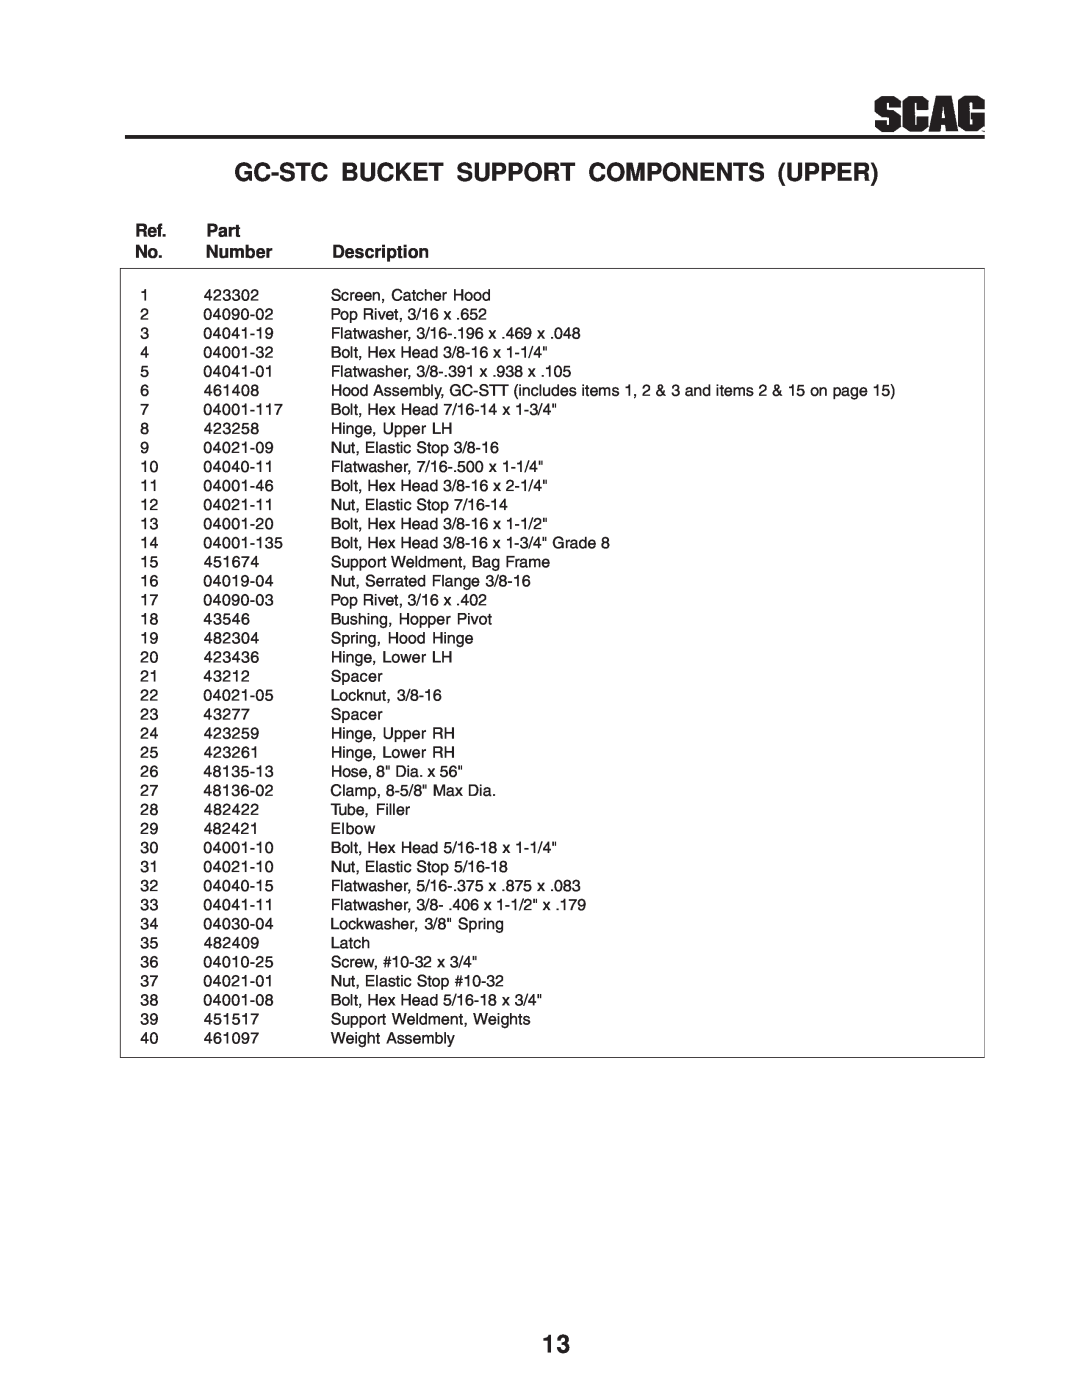 Scag Power Equipment GC-STC-V Gc-Stc Bucket Support Components Upper, Part, Number, Description, 423302 